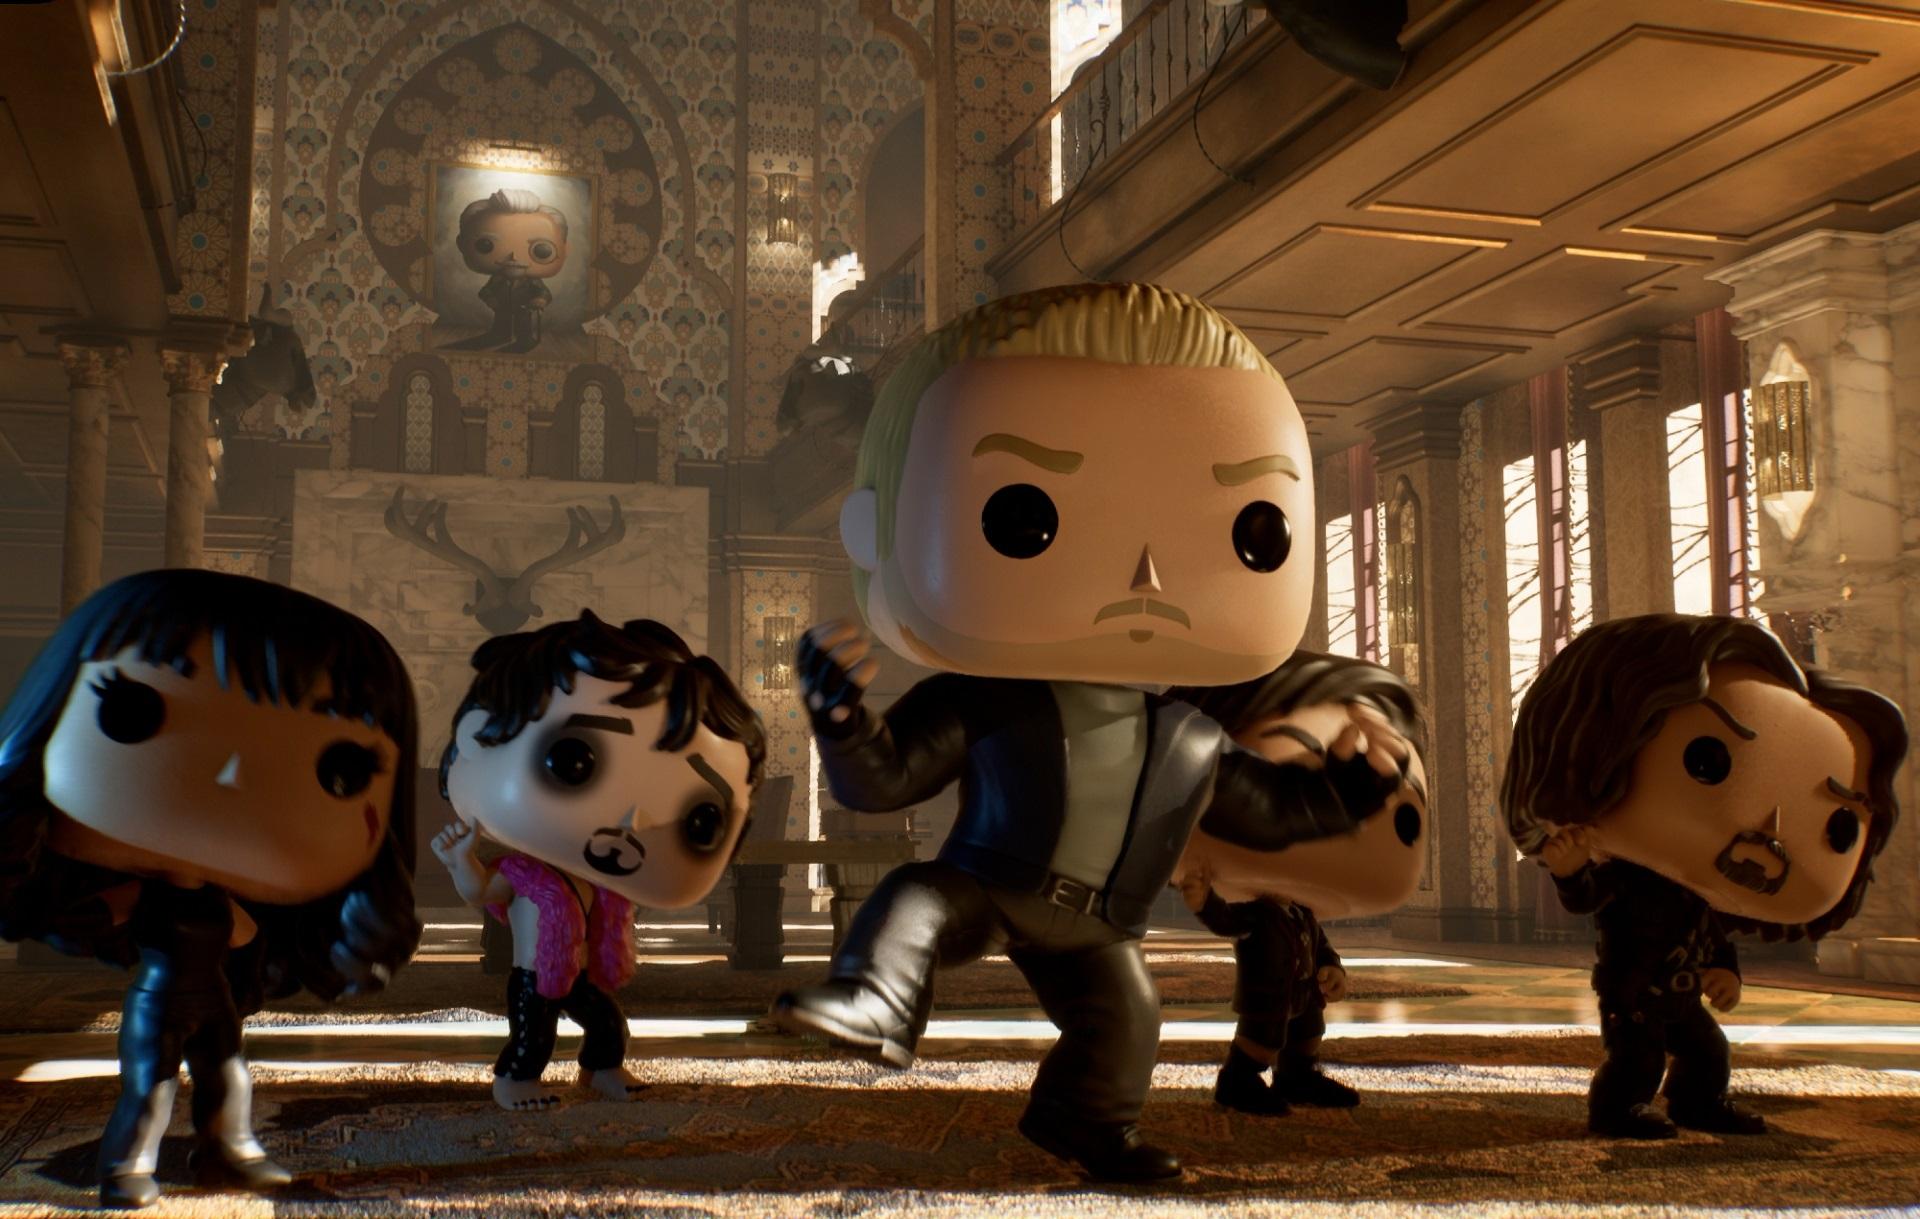 'Funko Fusion' Characters from different franchises dancing together.